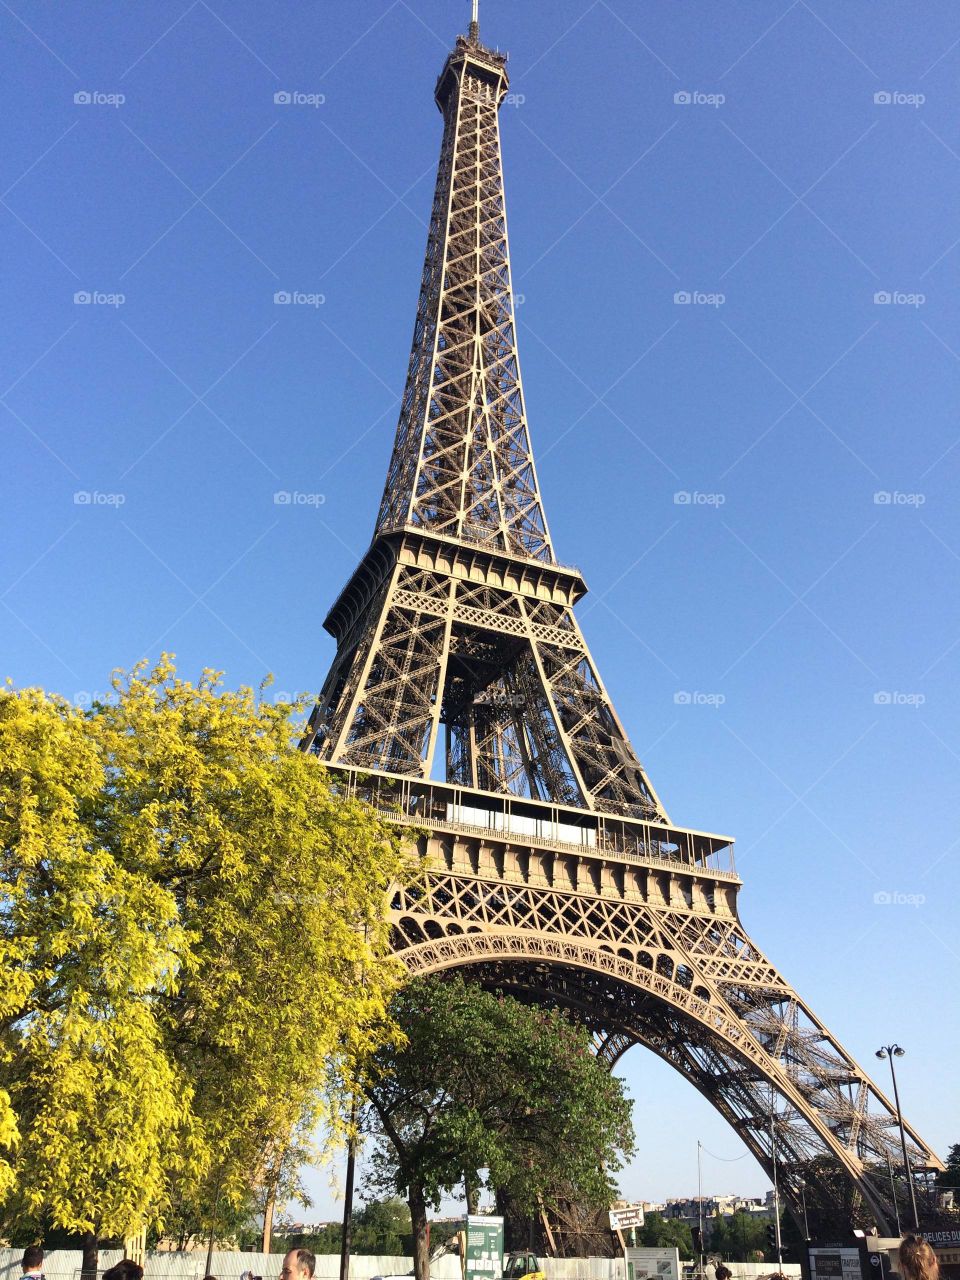 Eiffel Tower is among one of the most visiting places . Every year more than 10 million people visit here . This Juin what could be more enjoyable places than Eiffel Tower.